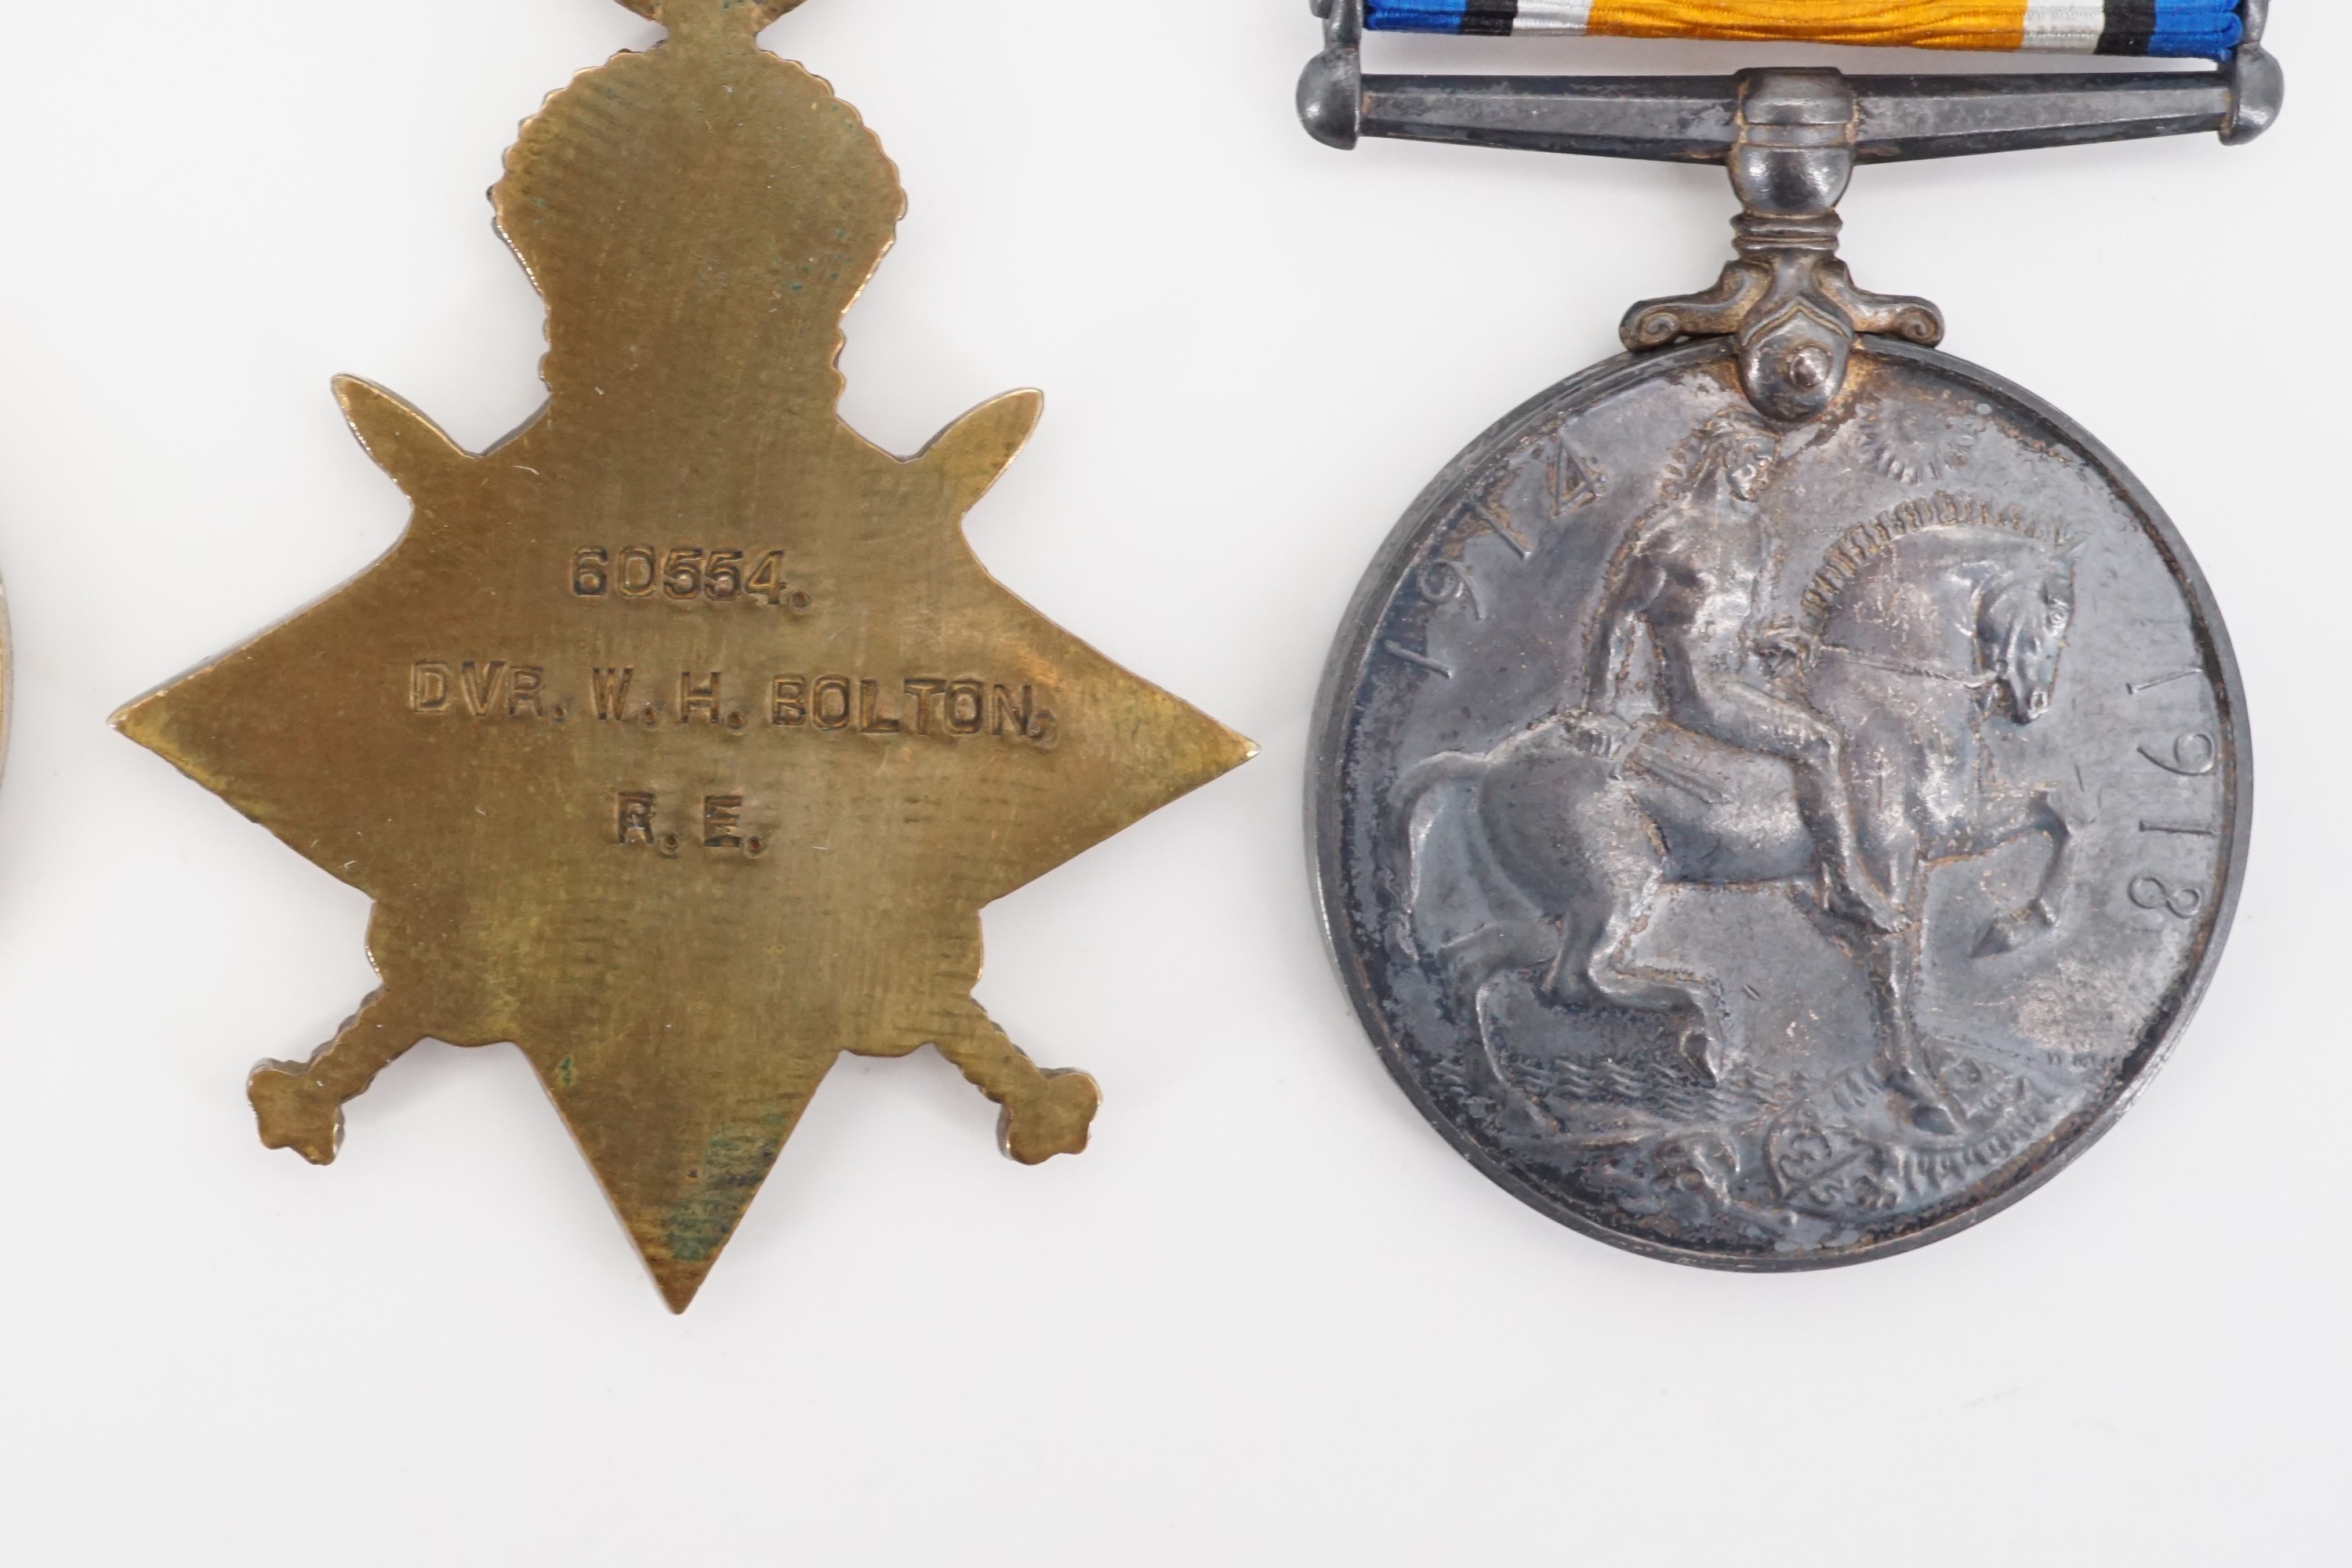 1914-15 Star, British War and Victory medals to 60554, Dvr W H Bolton, RE, with issue documents etc - Image 5 of 7